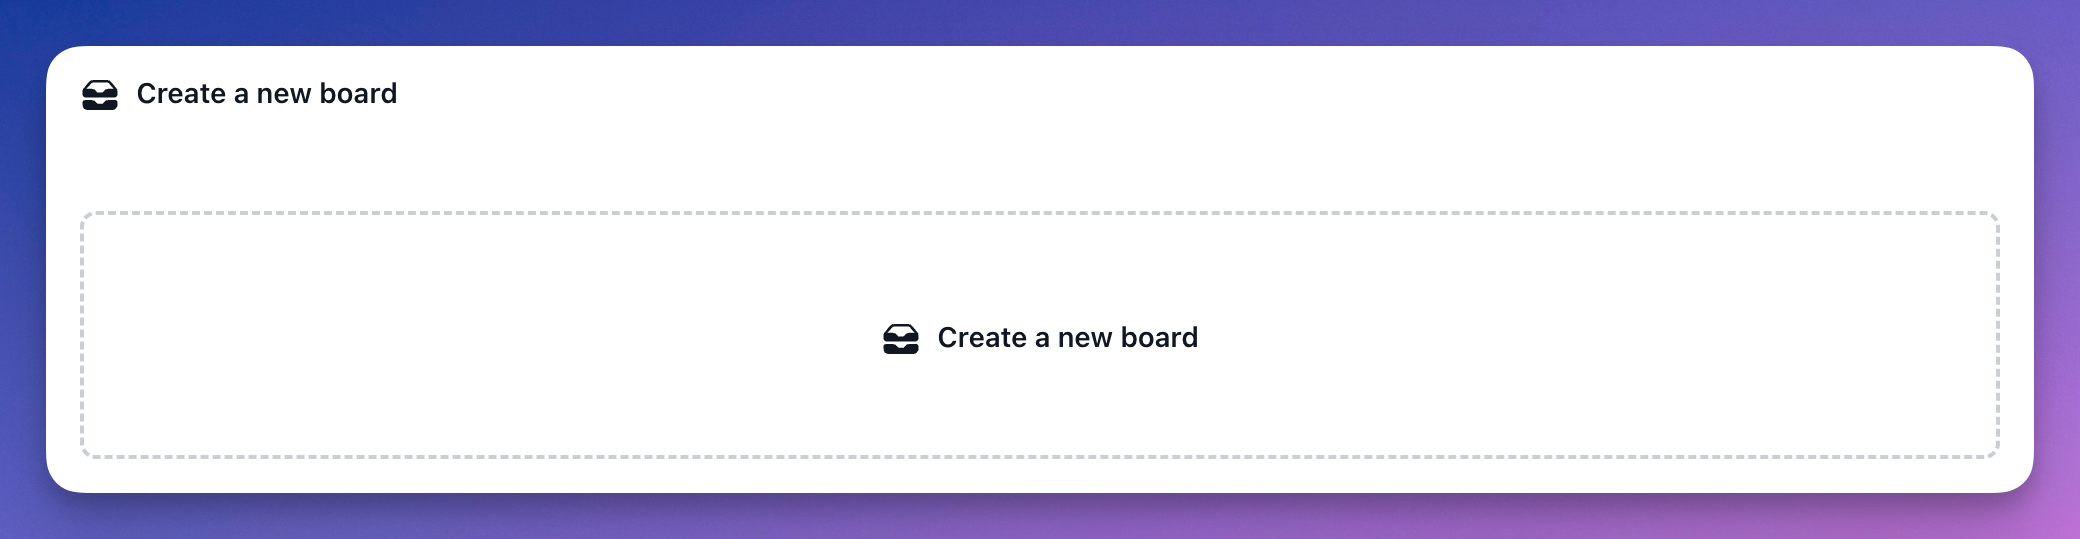 An image showing the two possible states for the new board button